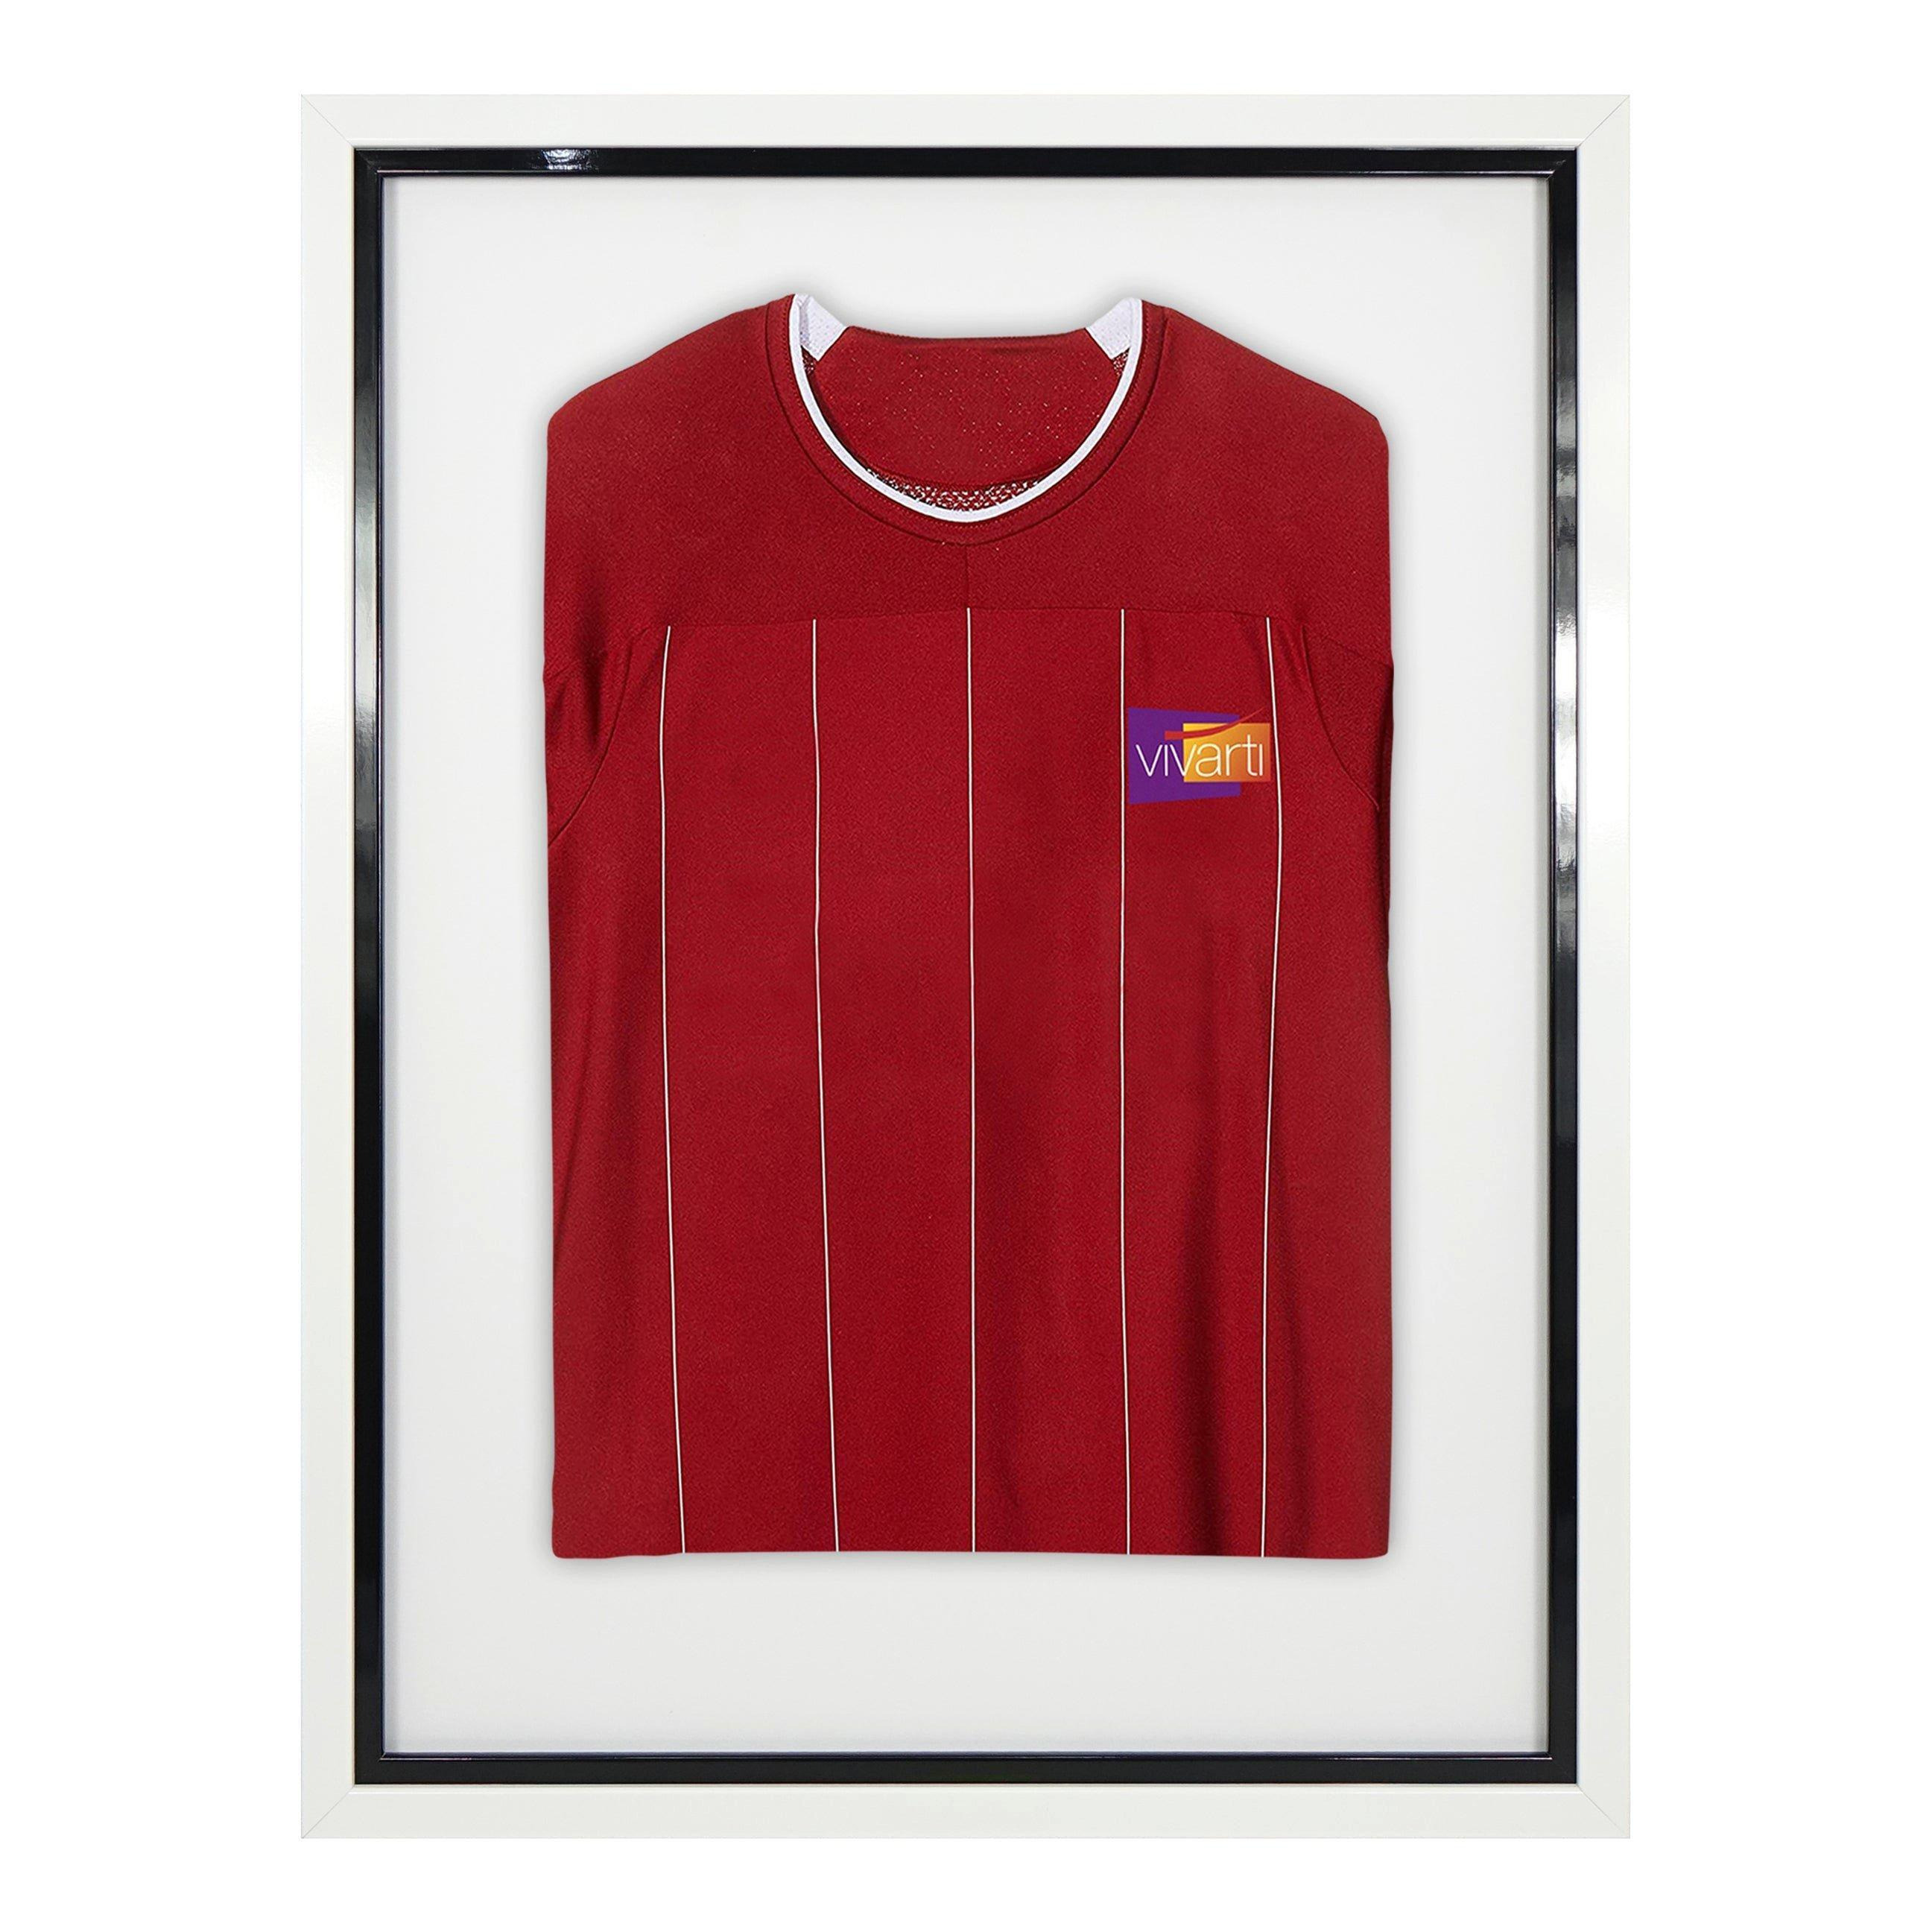 Standard Mounted Sports Shirt Display Frame with White Frame and Black Inner Frame 60 x 80cm - image 1